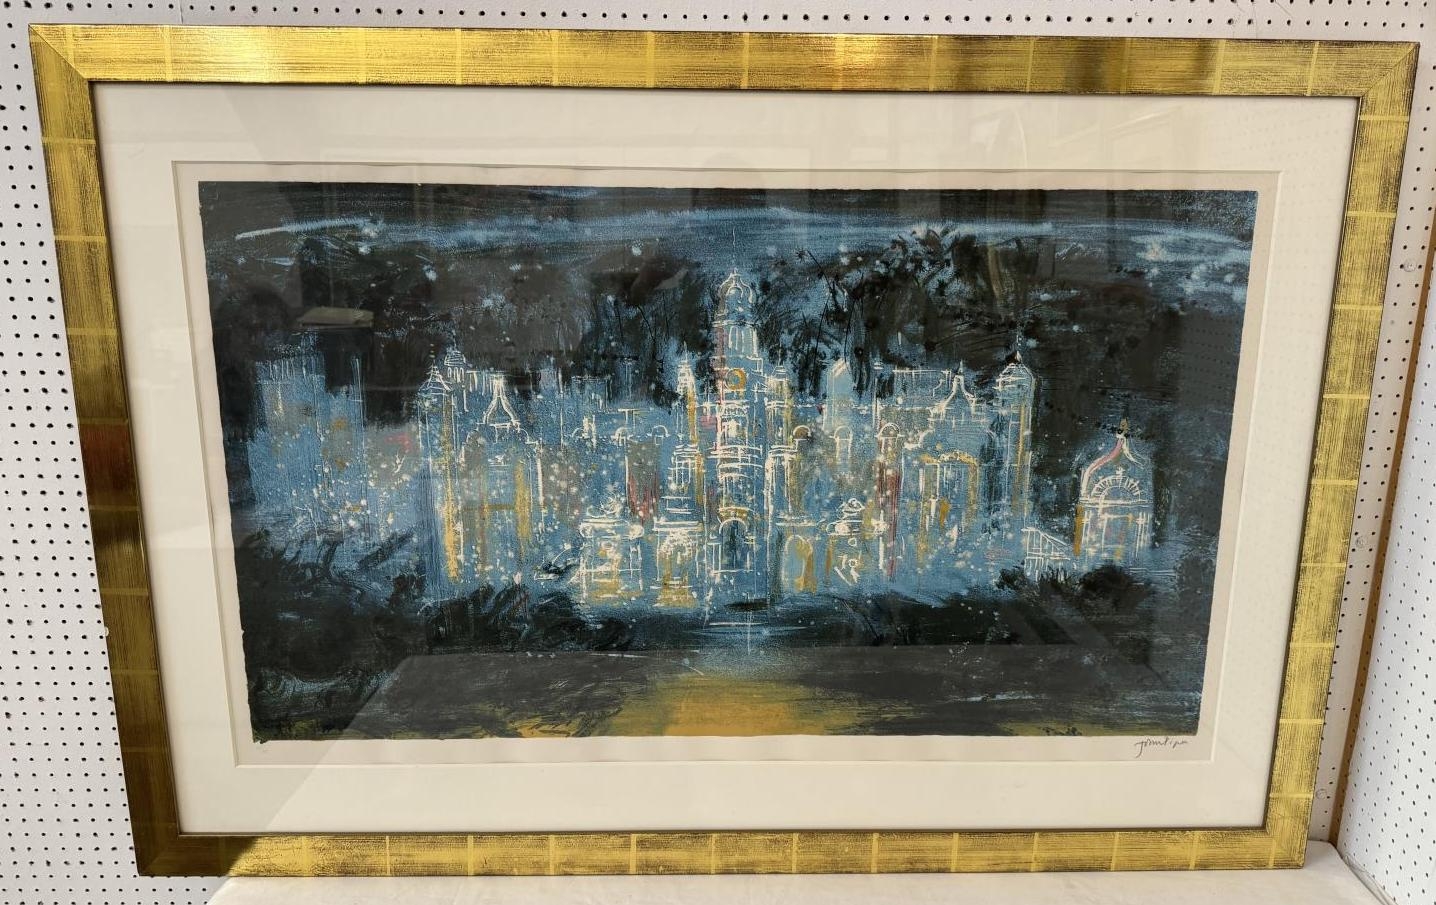 John Piper (British, 1903-1992) - 'Harlaxton (blue)' (1977), limited edition screenprint in colours, - Image 6 of 10